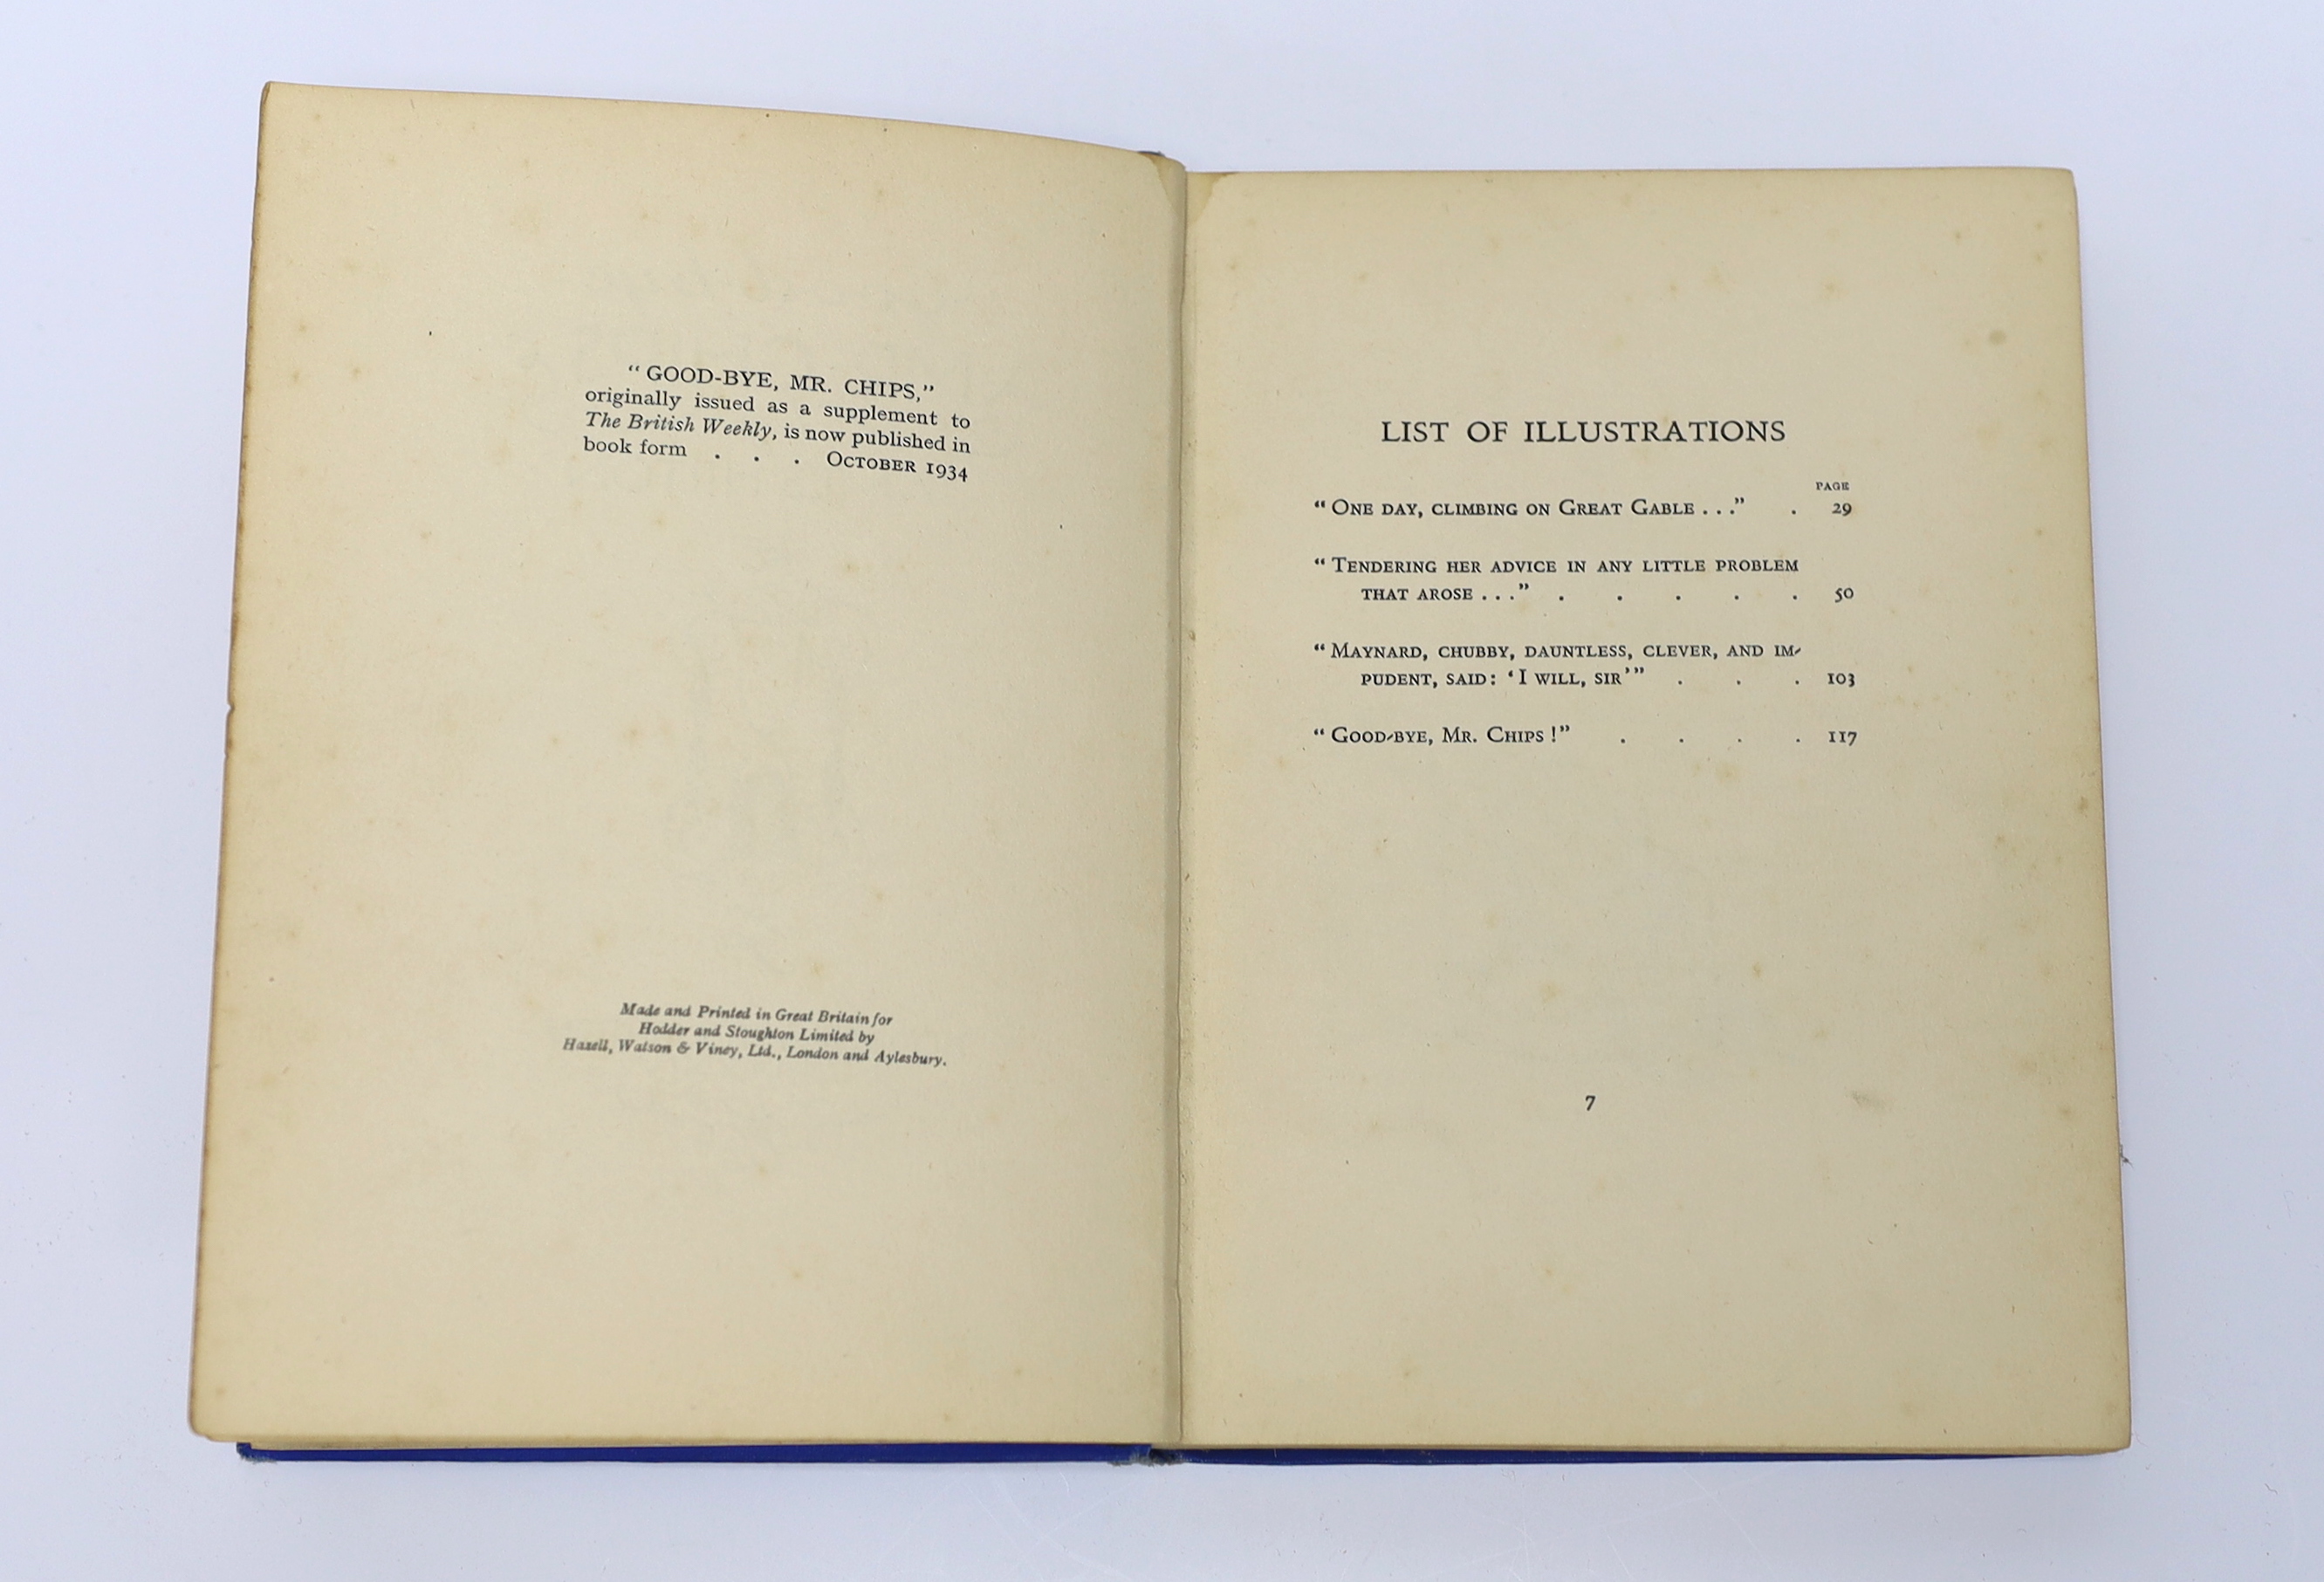 Hilton, James - Good-bye Mr. Chips, 1st edition, SIGNED in ink by the author to front free endpaper, illustrated by Bip Pares, 8vo, original publishers blue cloth, Hodder & Stoughton, London, 1934, Note: The basis for th